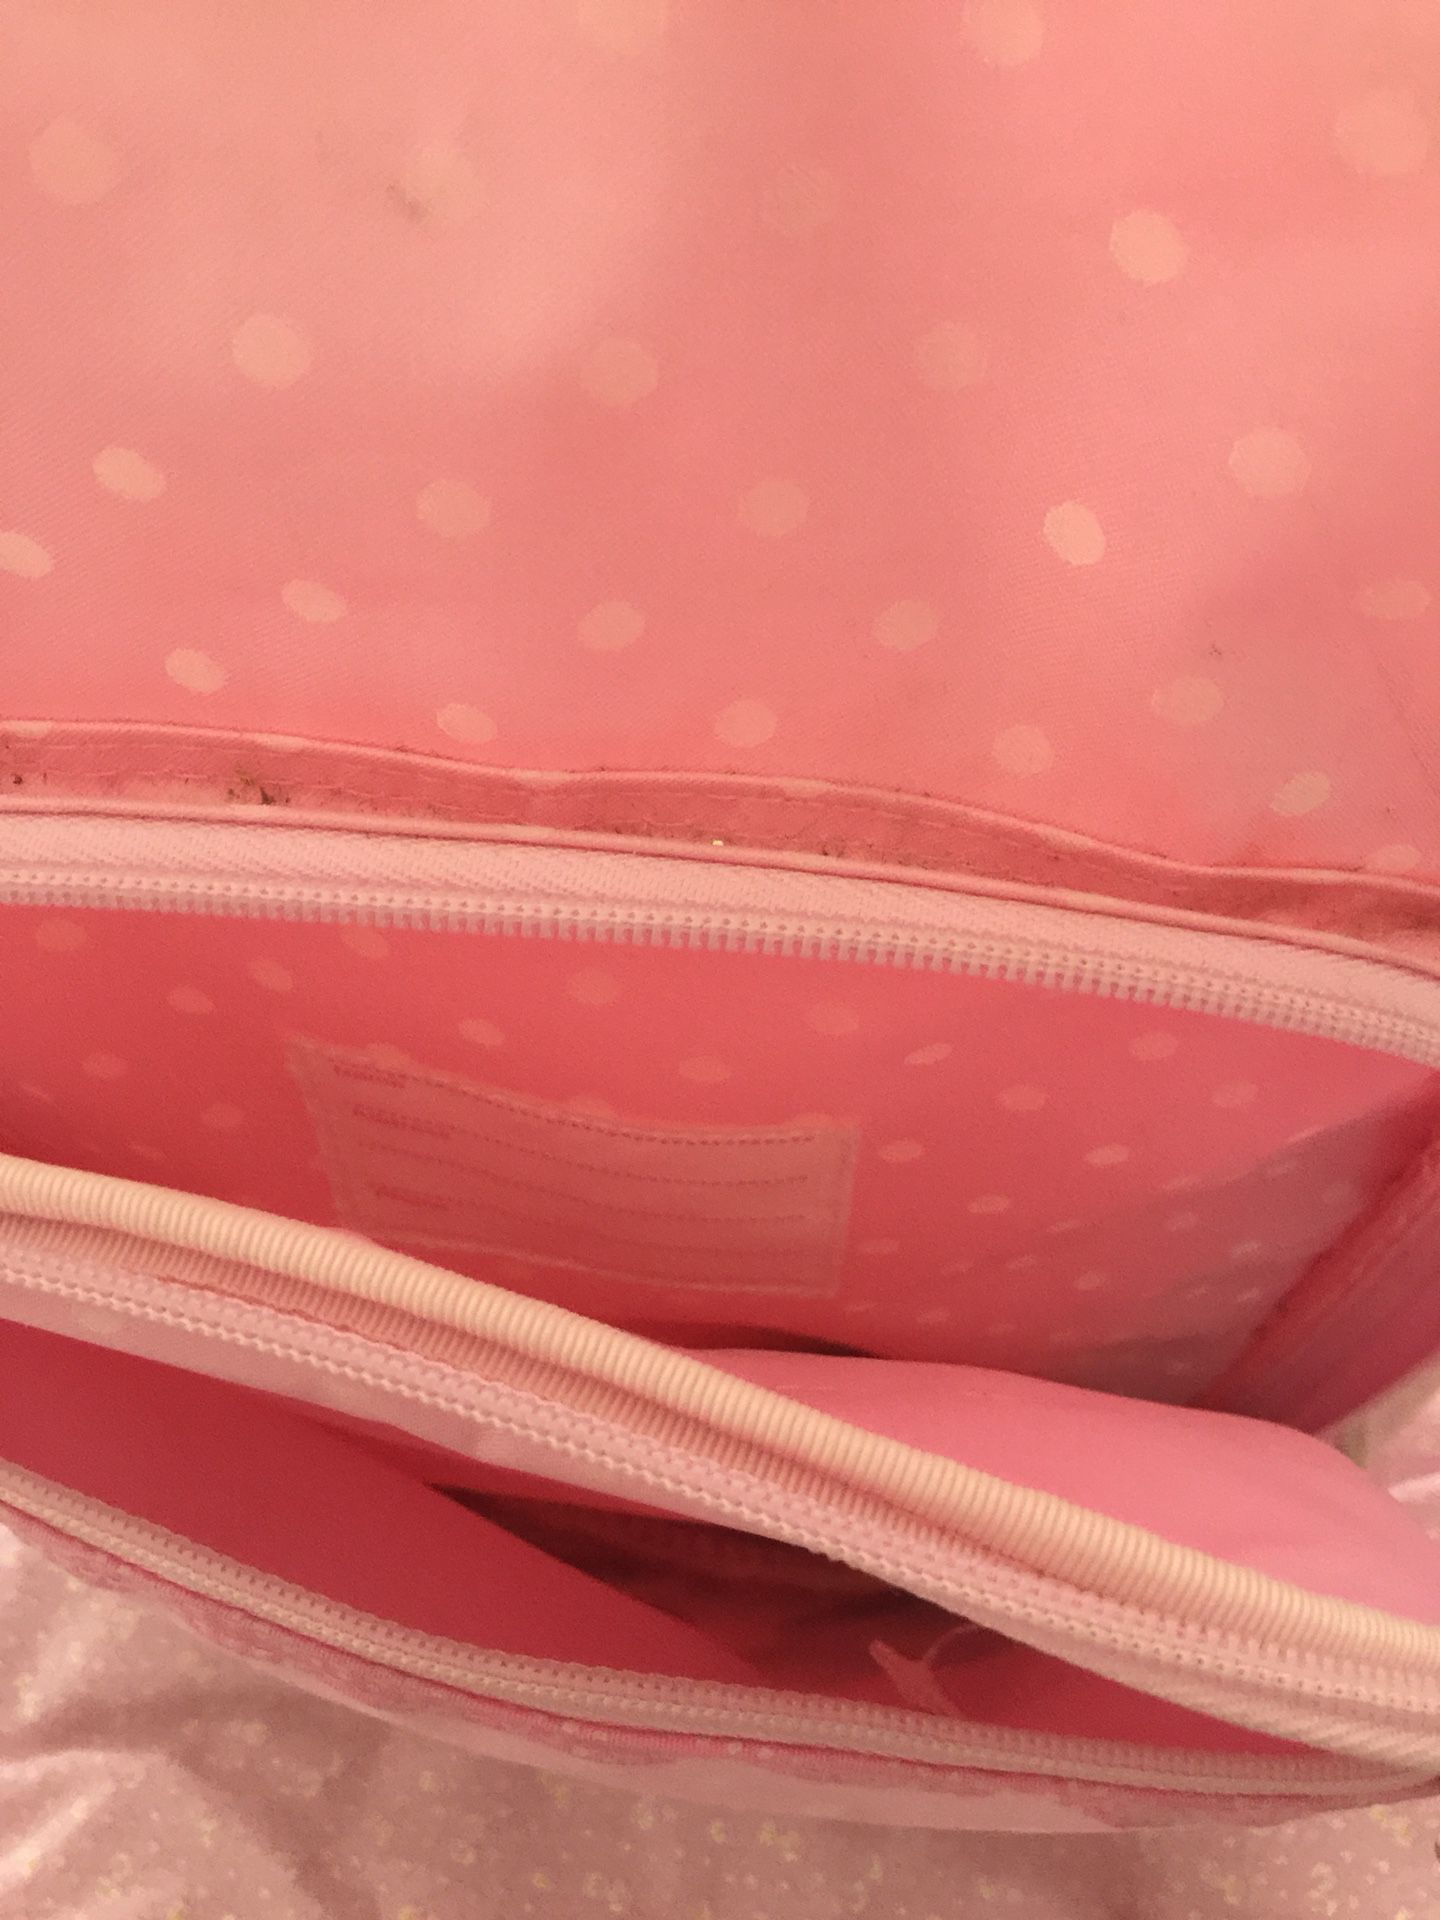 HELLO KITTY light Pink rolling backpack